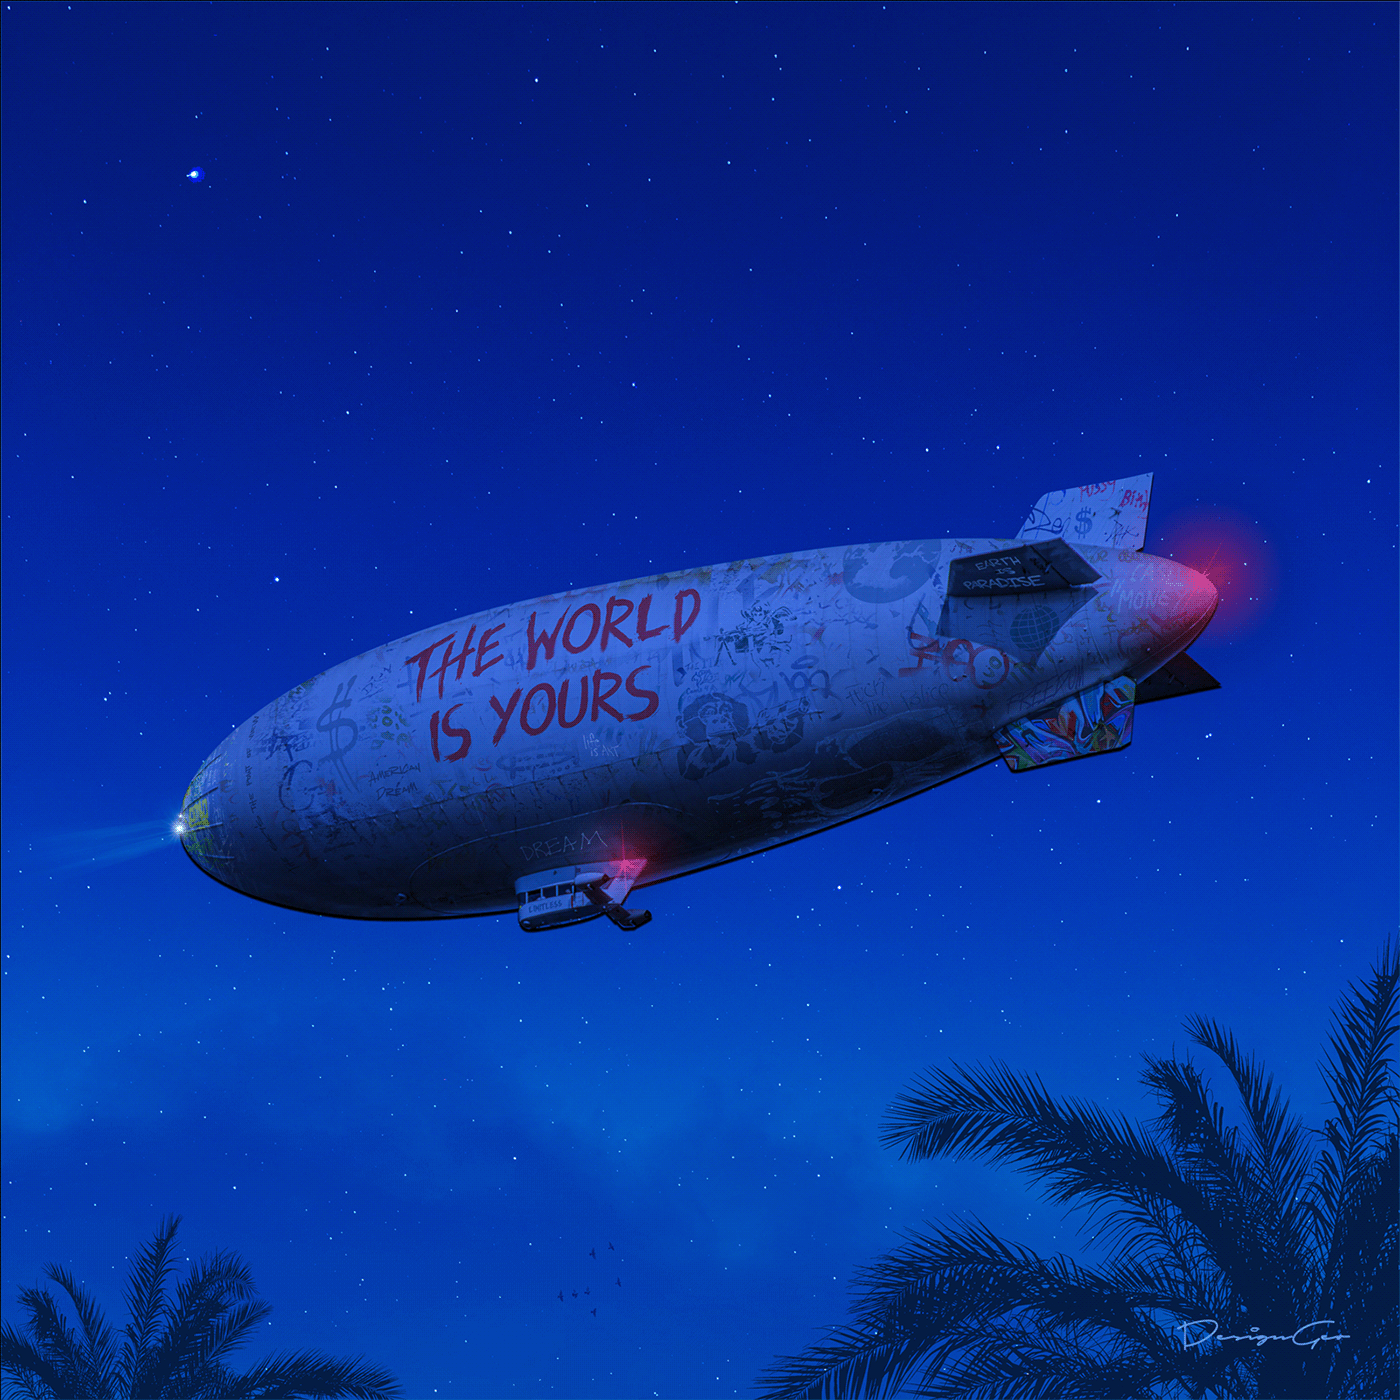 Scarface THE WORLD IS YOURS blimp Wallpaper phone